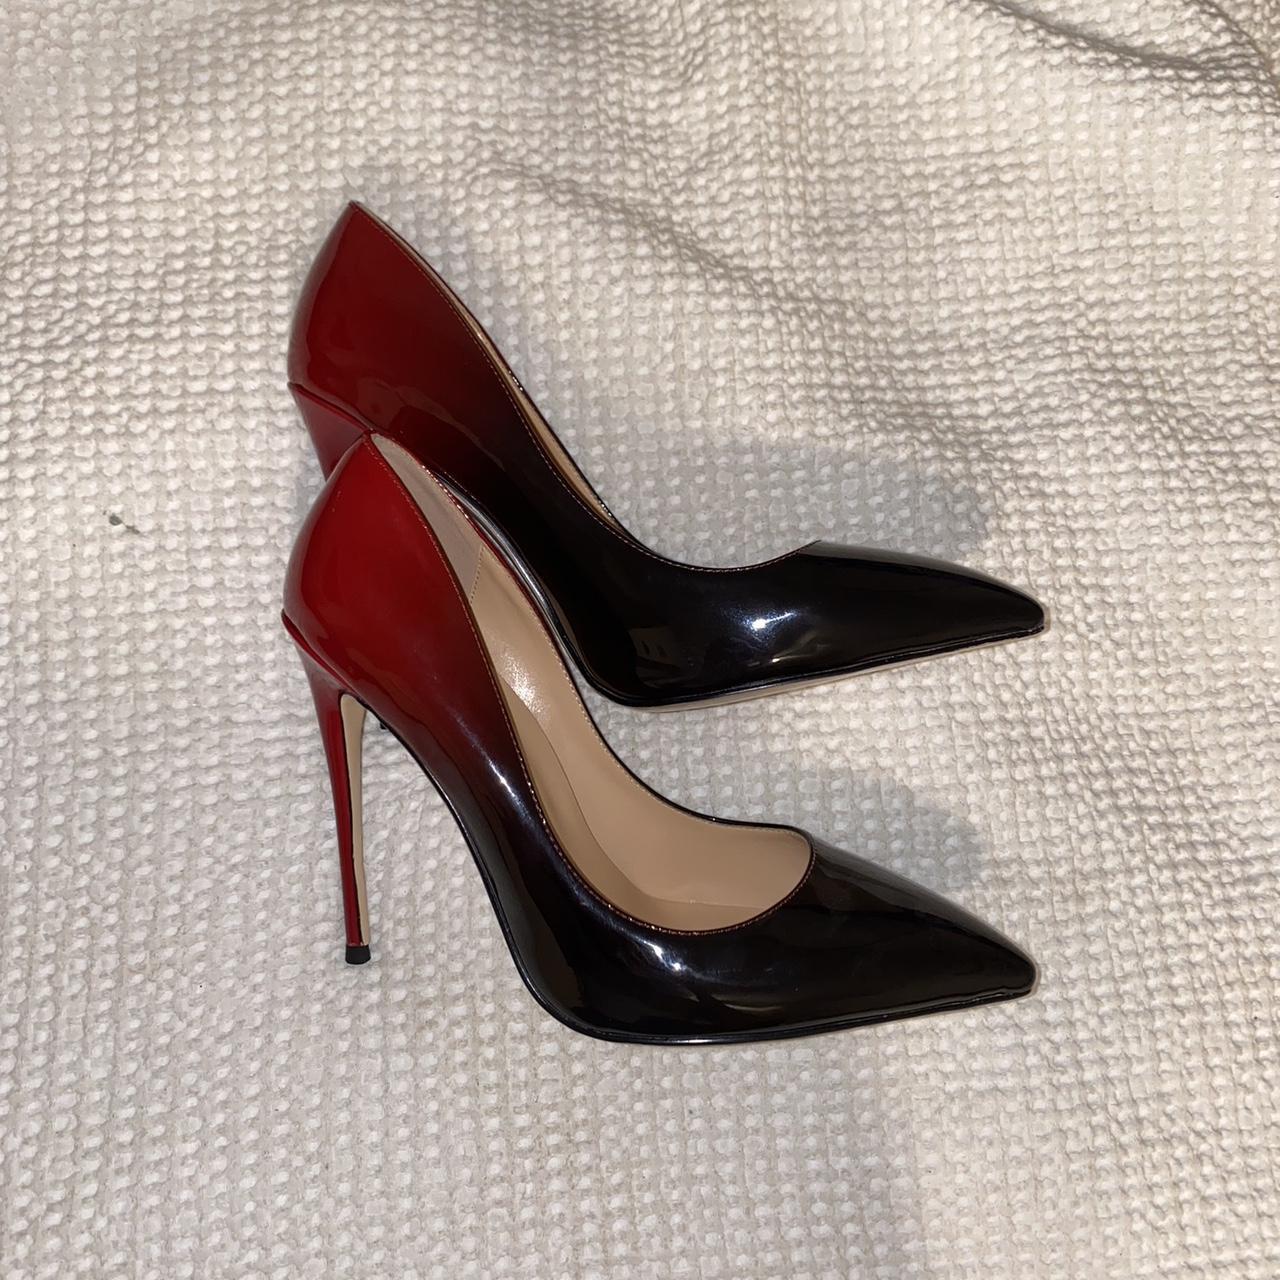 Red and black pumps, very similar to Louboutin ‘So... - Depop